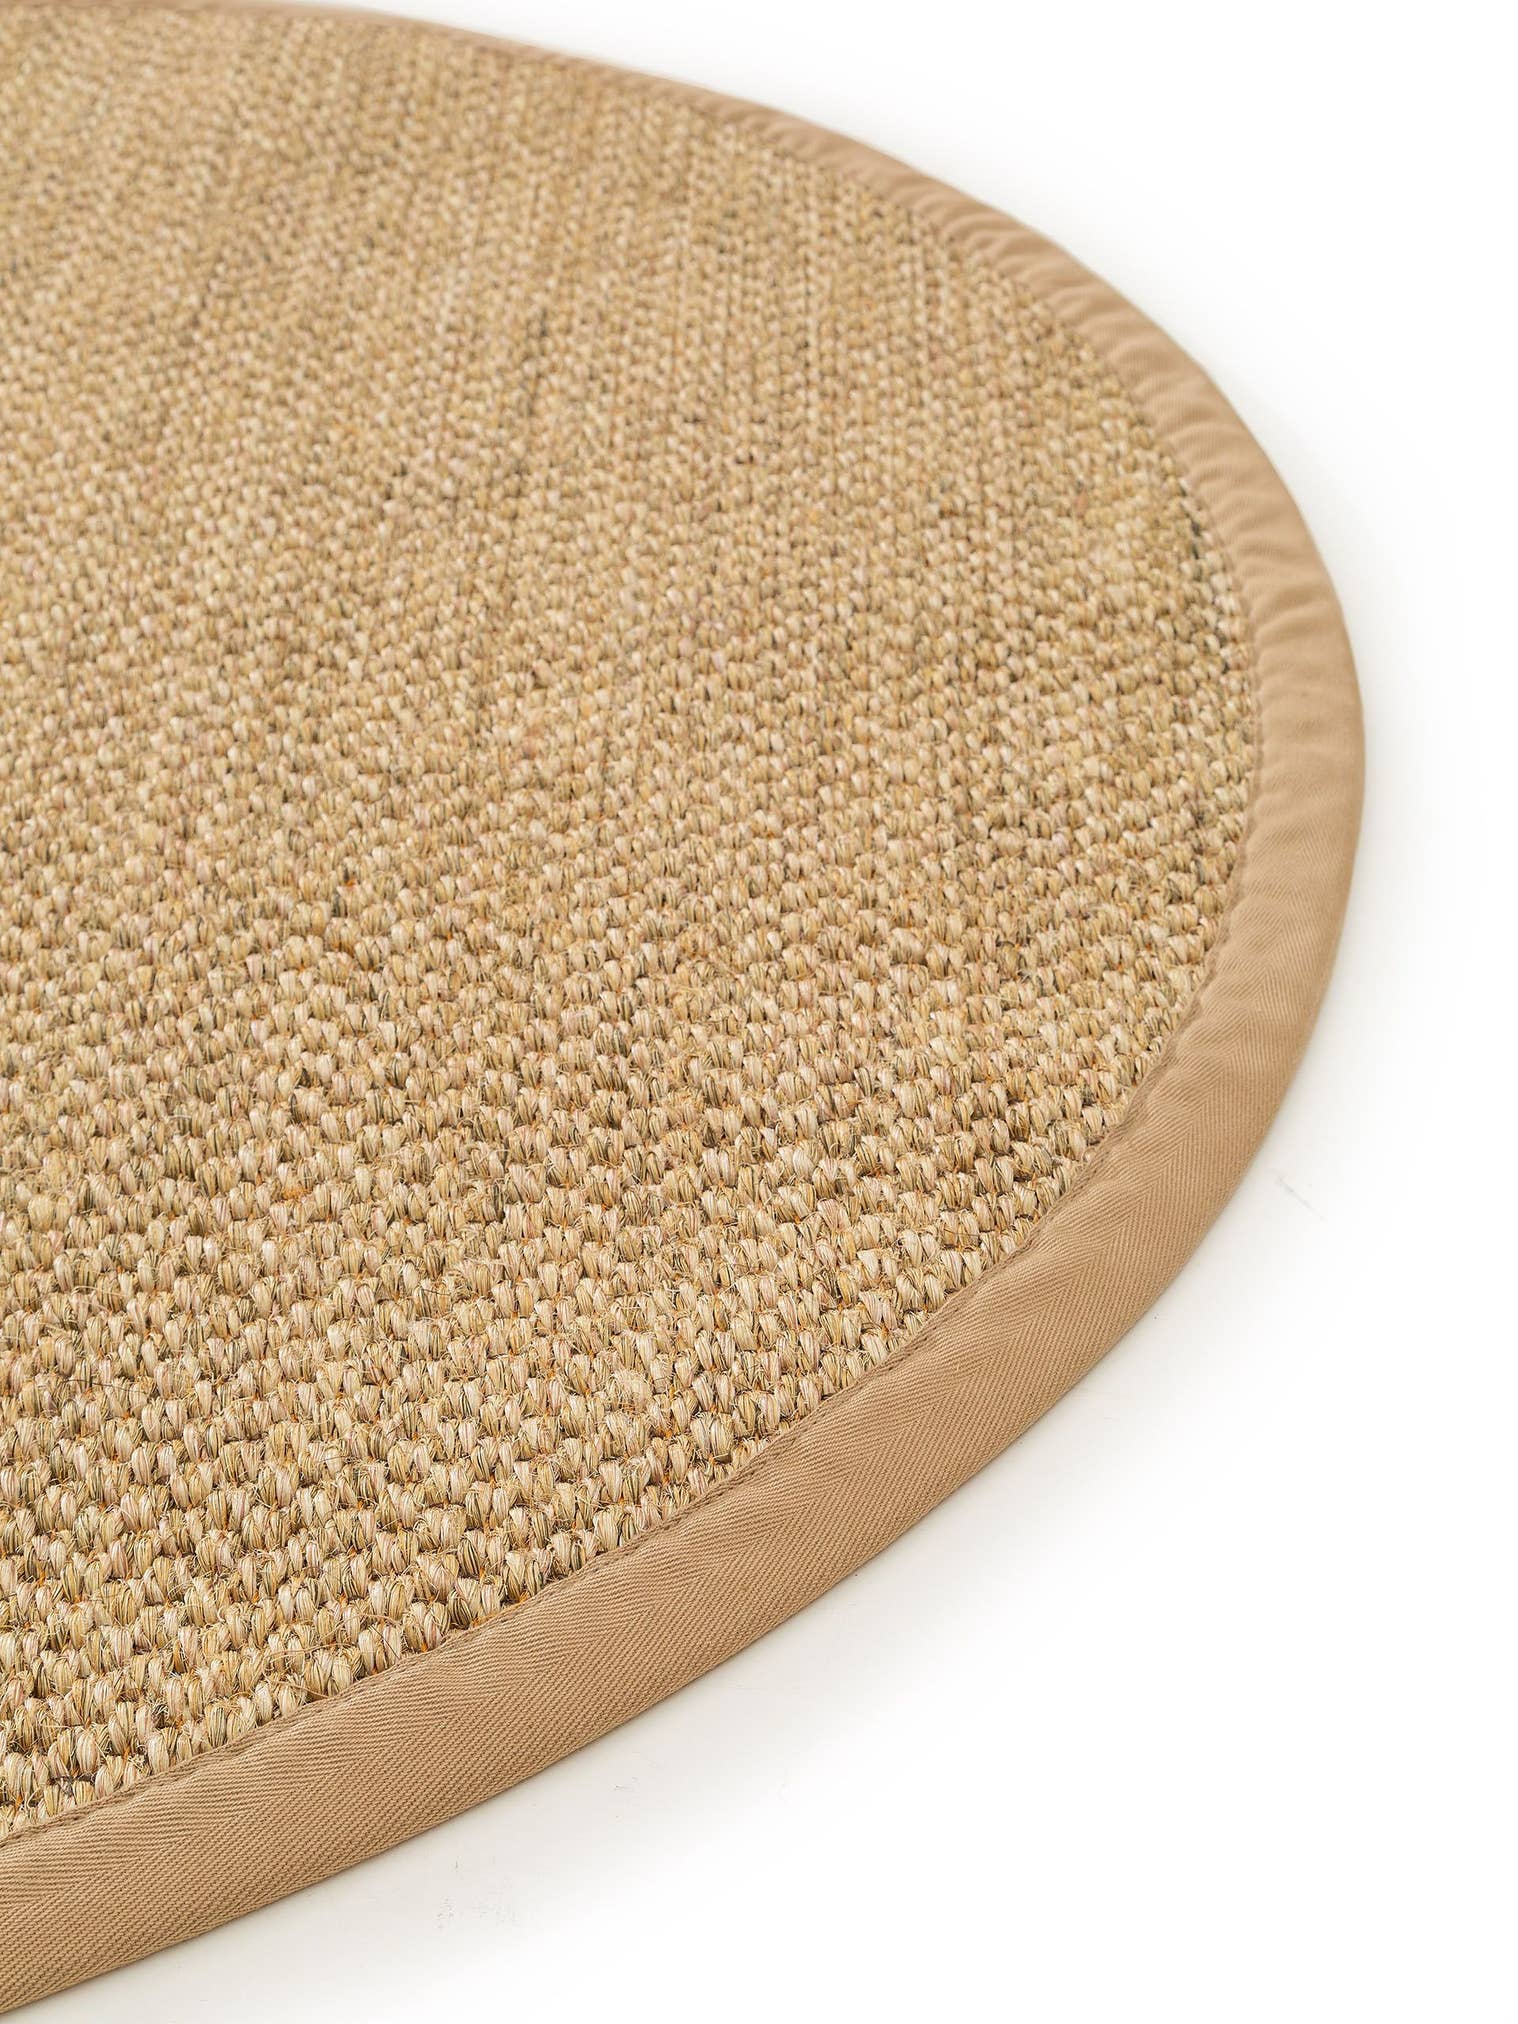 Rug made of 100% Sisal in Beige with a 1- 5 mm high pile by benuta Pure